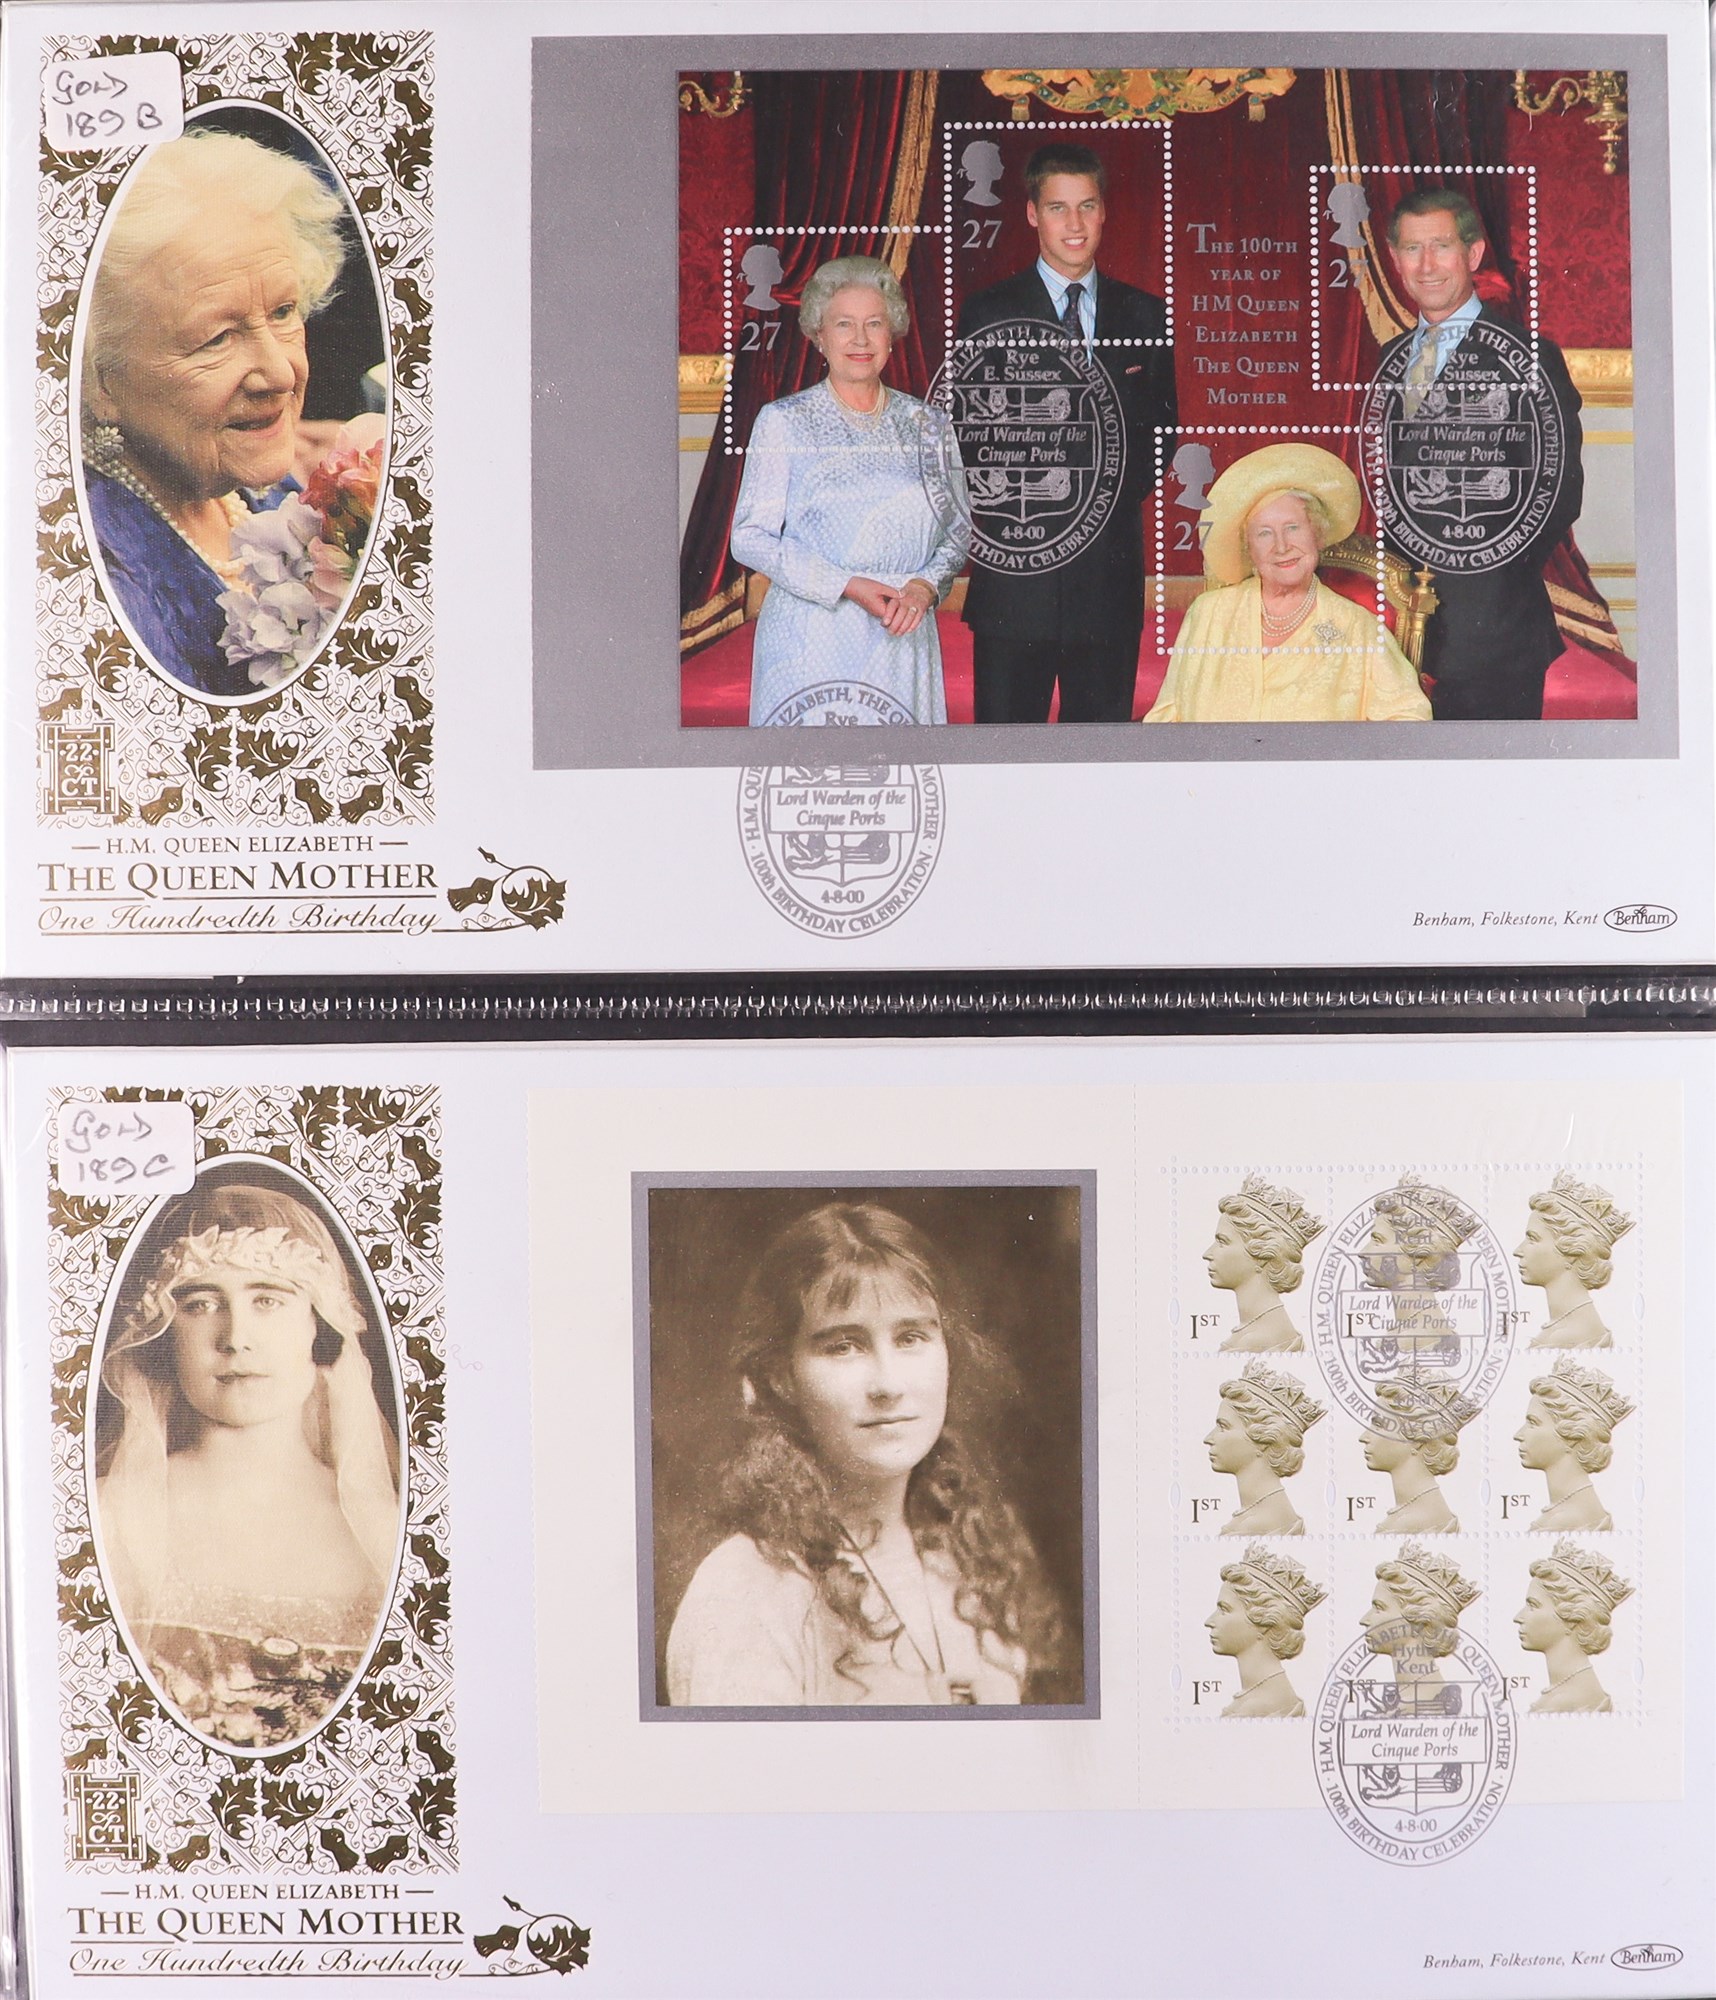 GB. COVERS & POSTAL HISTORY BENHAM 'GOLD 500' COVERS 1994 - 2000 Collection of 40 covers in Benham - Image 3 of 3